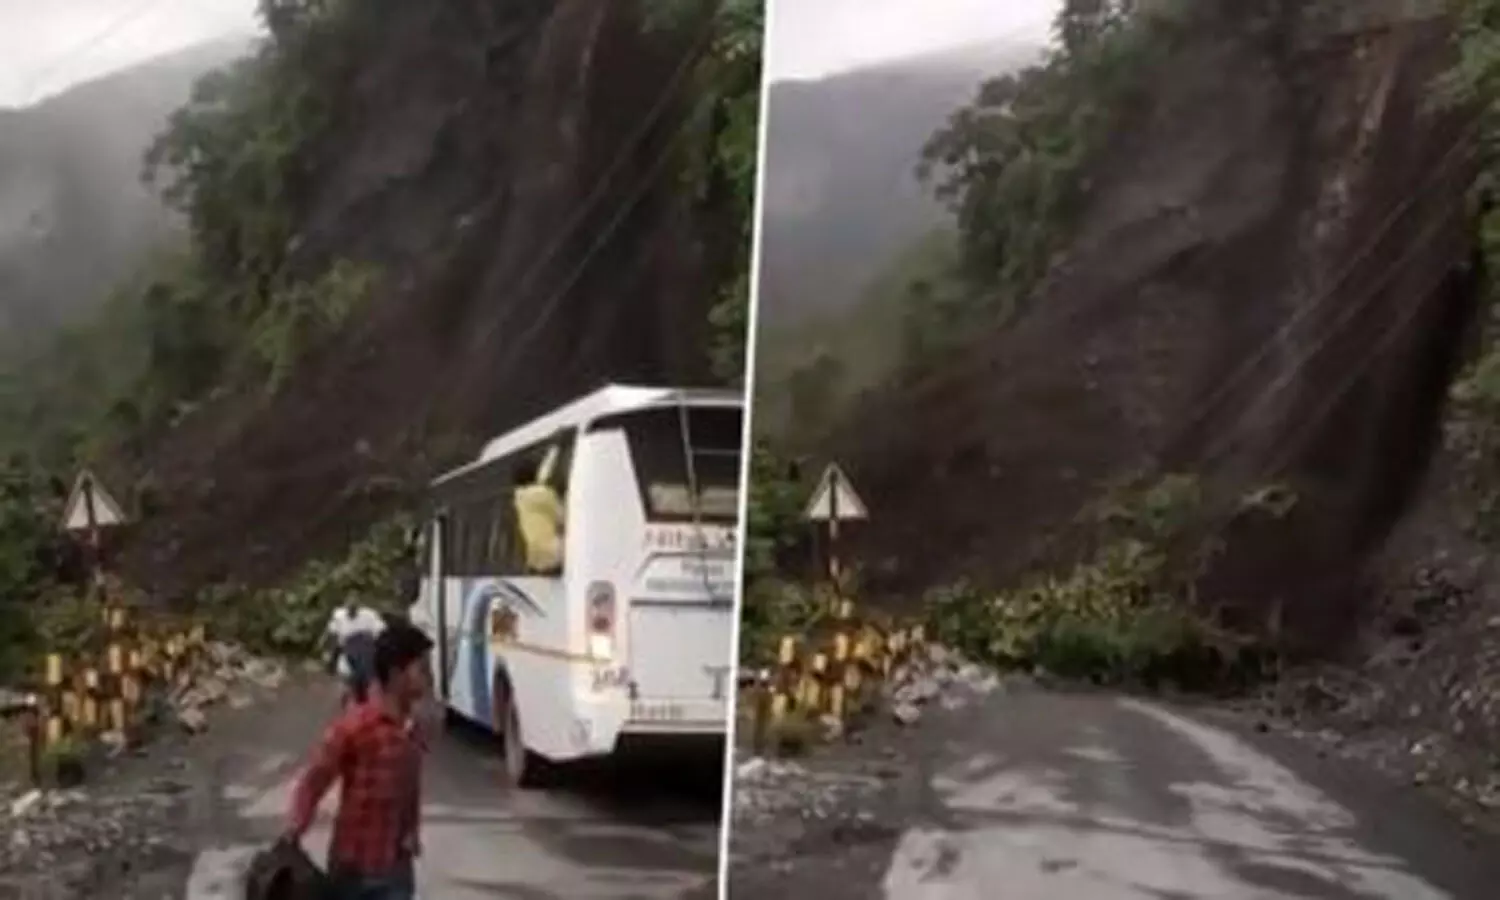 Bus carrying 14 passengers narrowly escapes fatal accident in Nainital after landslide